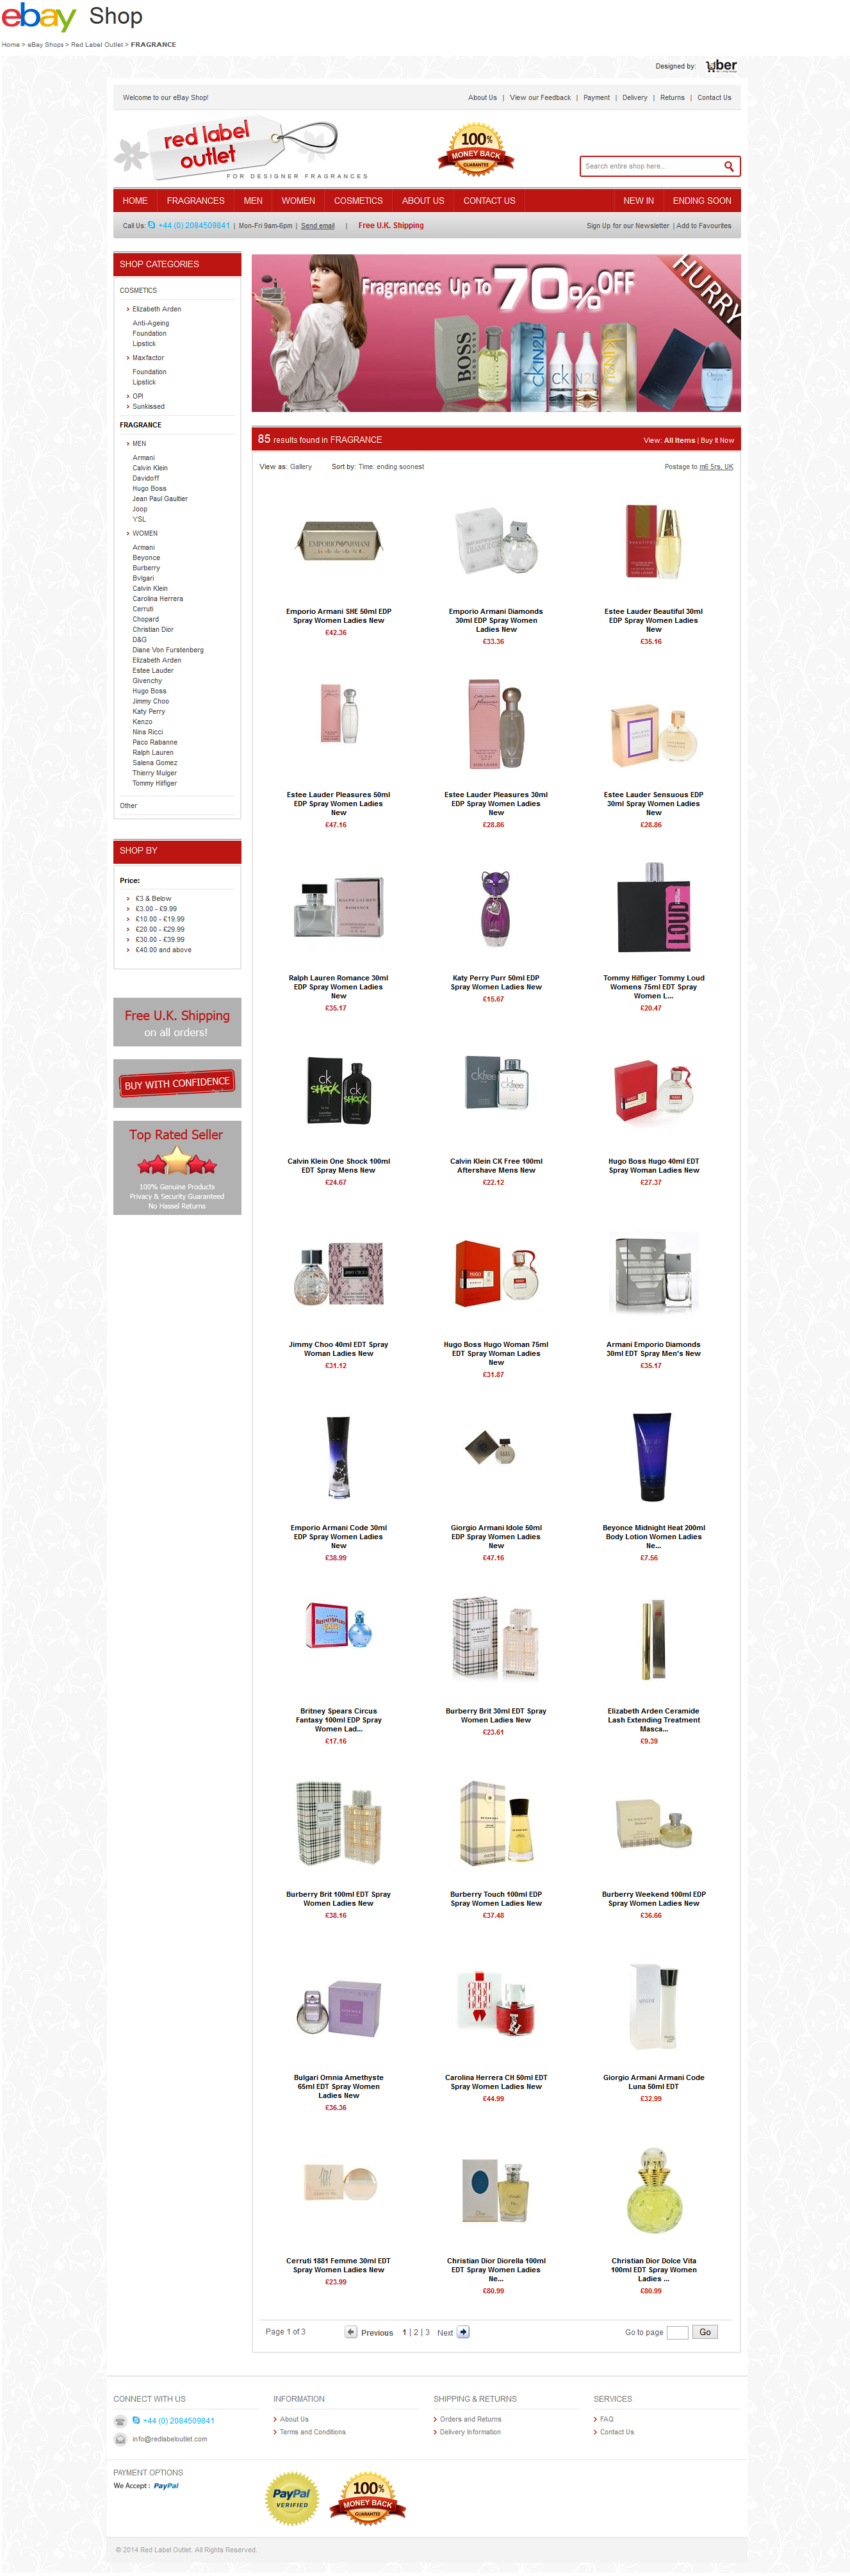 Red Label Outlet store on eBay category design